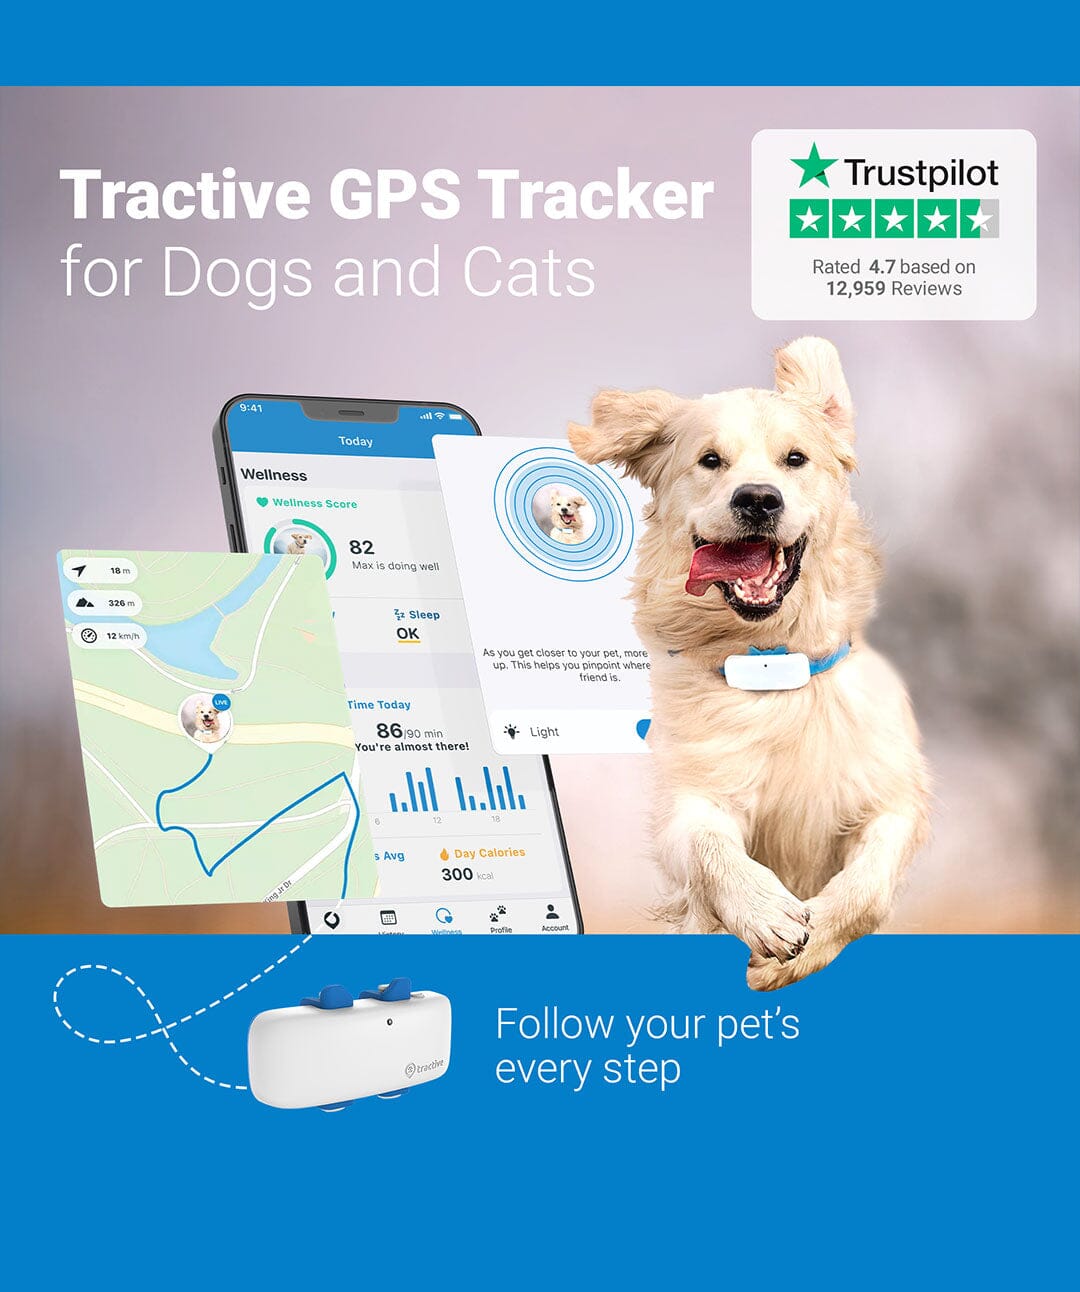 Tractive GPS Tracker & Health Monitoring for Dogs - Market Leading Pet GPS  Location Tracker, Wellness & Escape Alerts, Waterproof, Works with Any